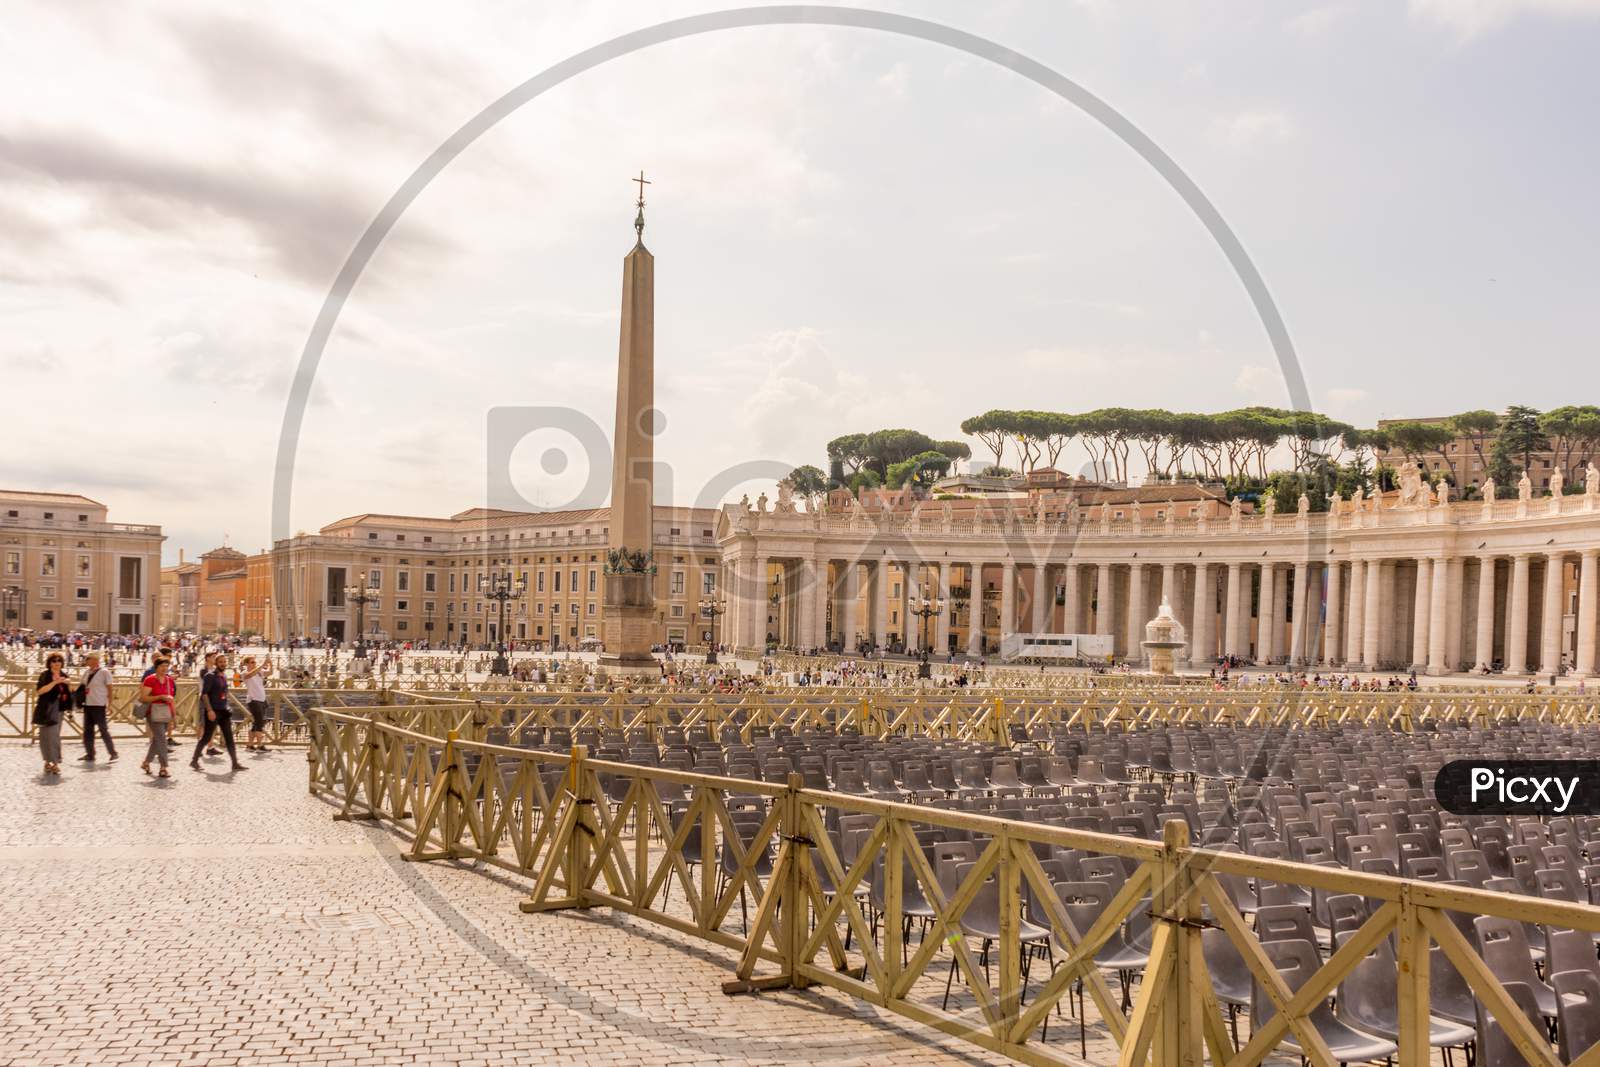 Vatican City, Italy - 23 June 2018: The Obelisk And Colonnades At St. Peter'S Square With Water Fountain In Vatican City